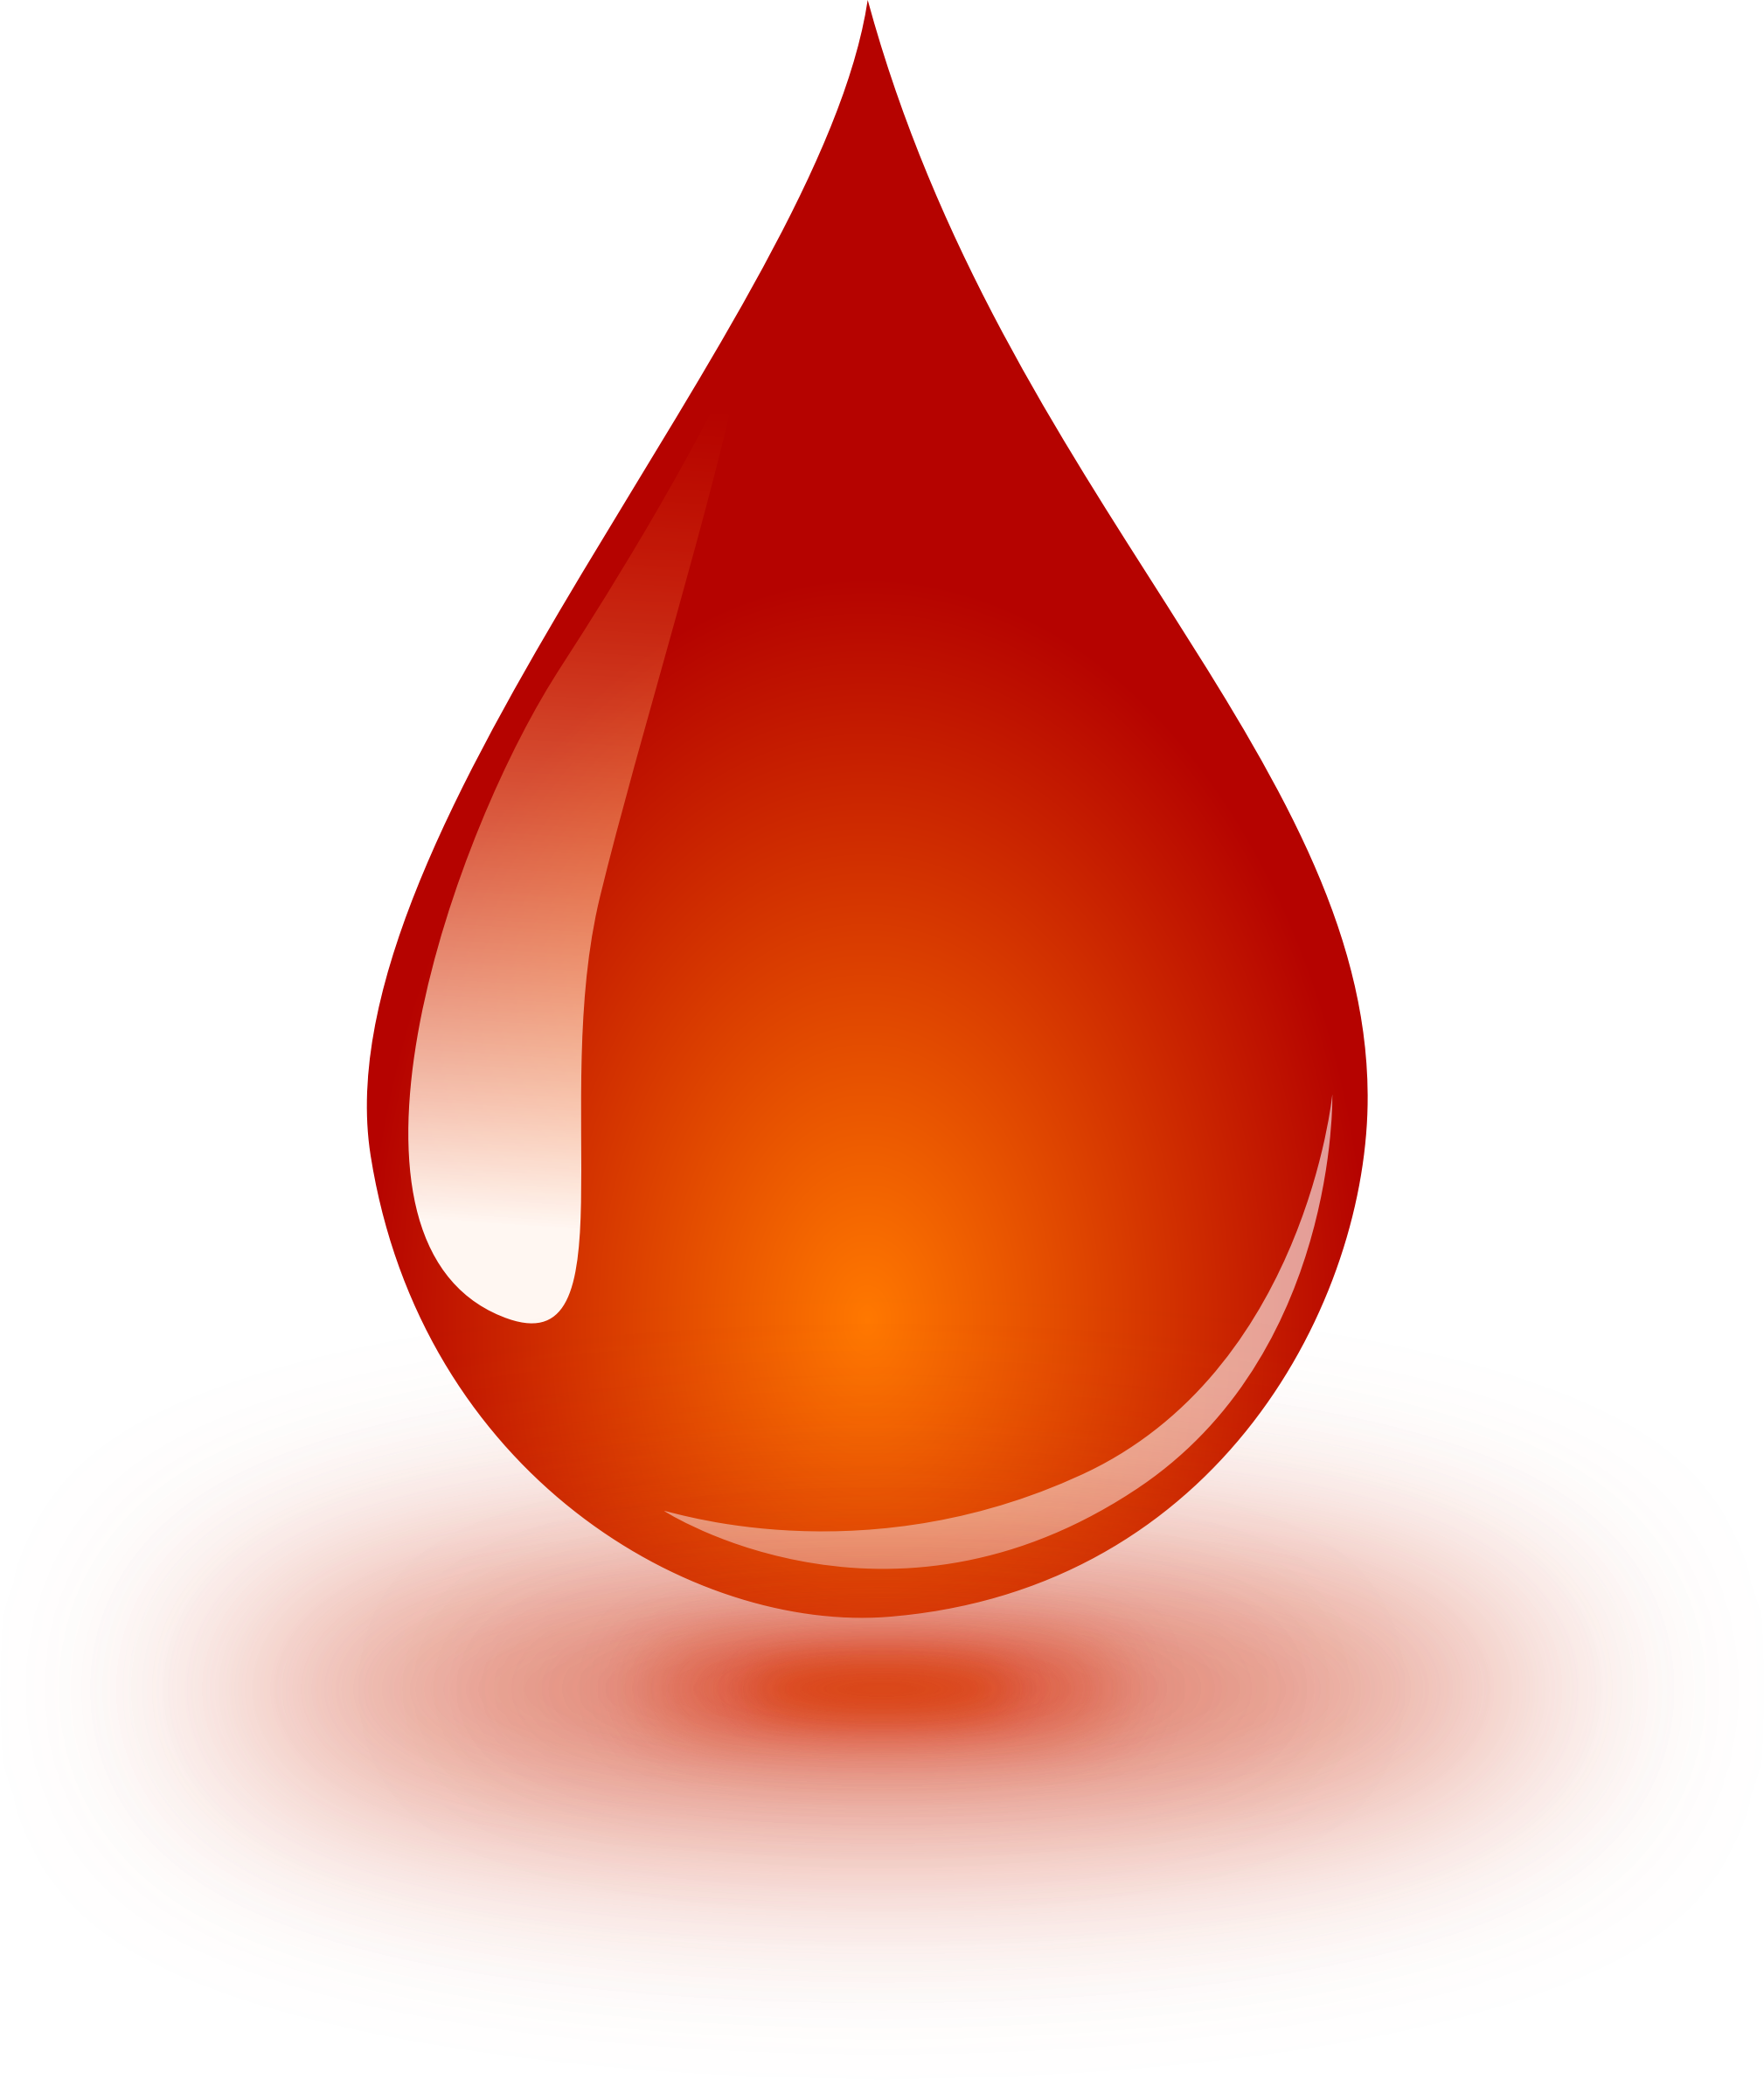 Donate Blood Clipart   Cliparthut   Free Clipart